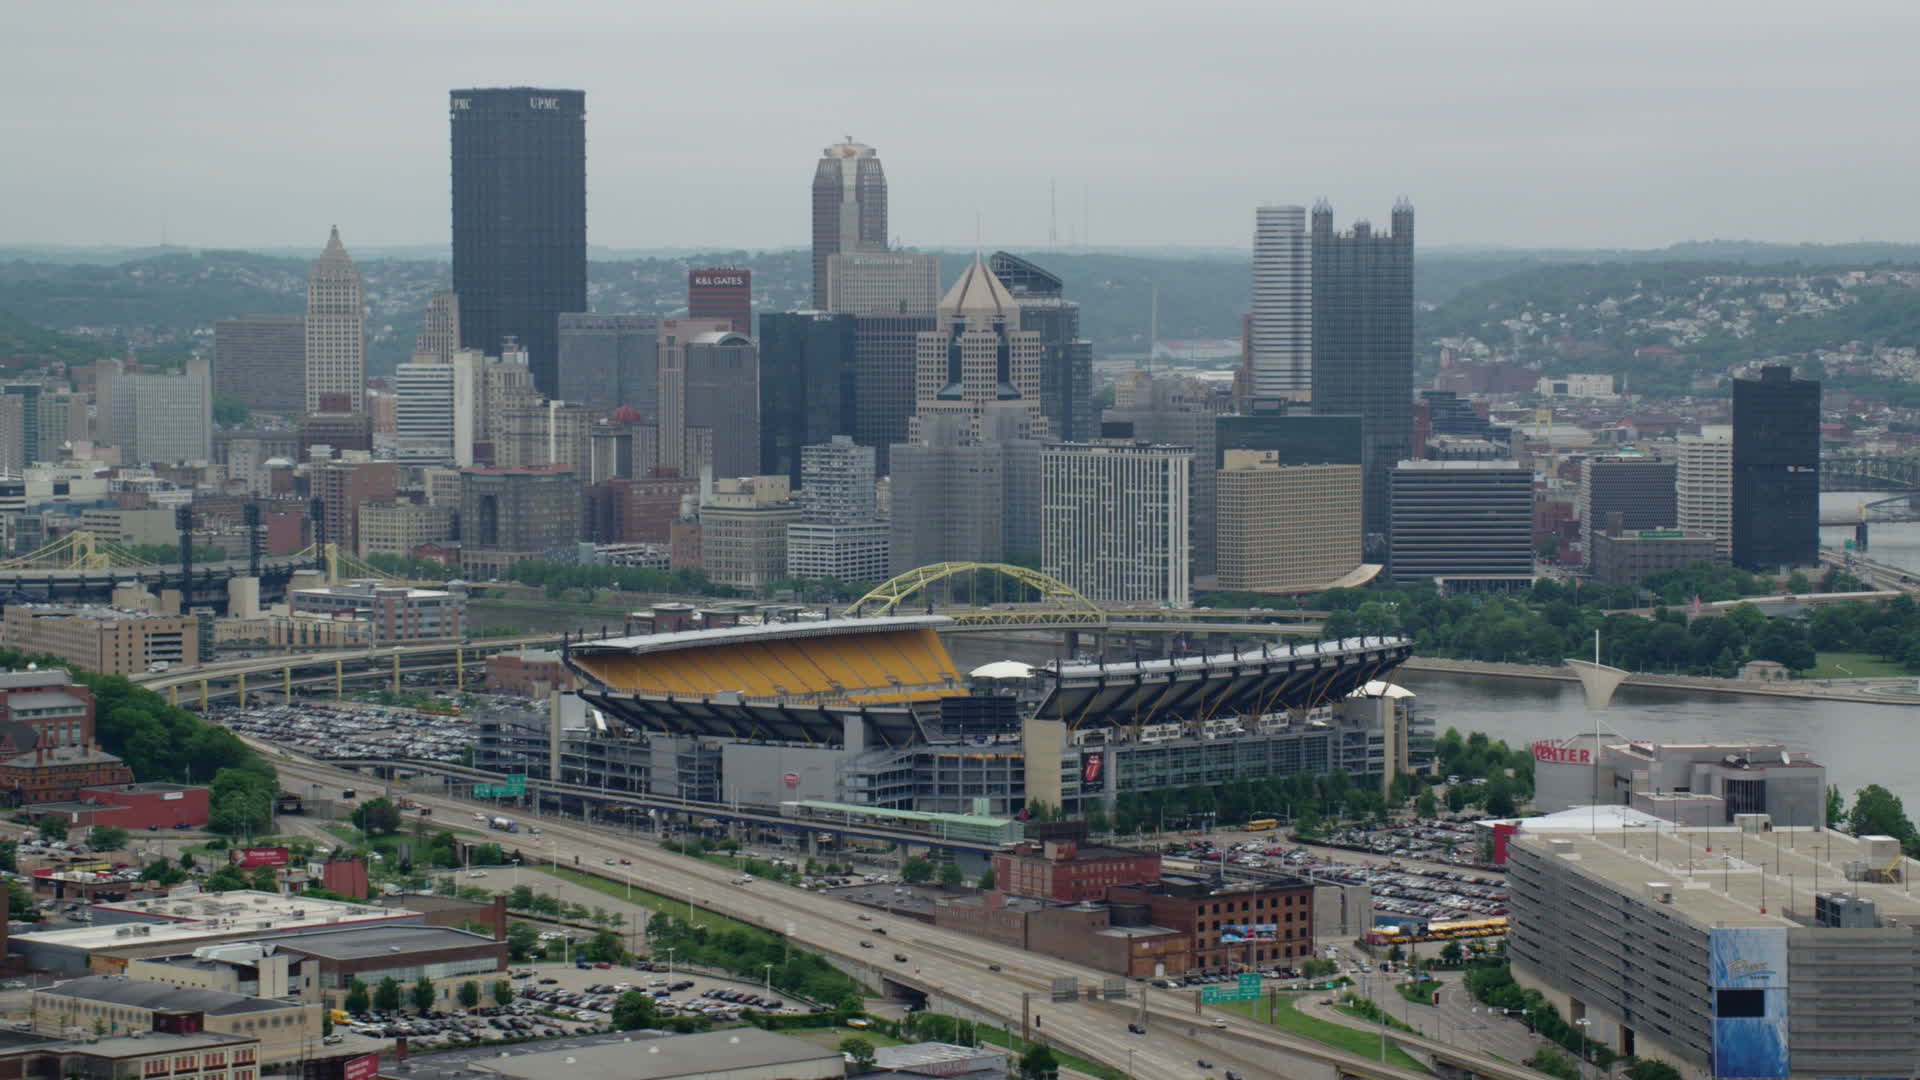 5K stock footage aerial video of Heinz Field Football Stadium and Downtown Pittsburgh, Pennsylvania Aerial Stock Footage AX105_226